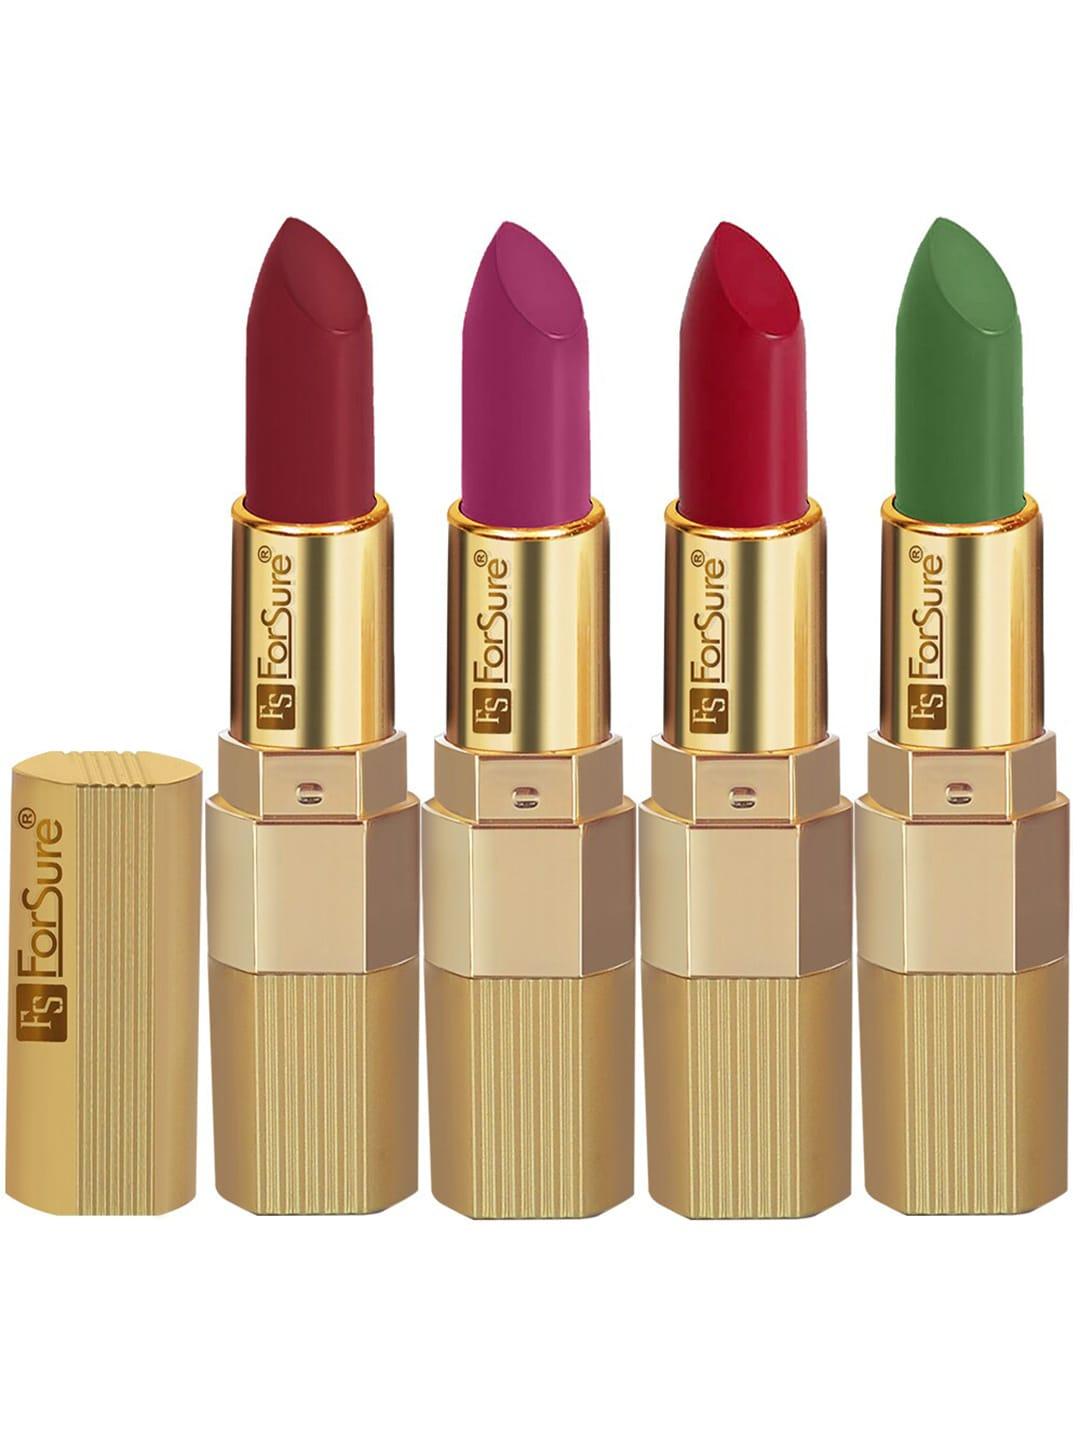 ForSure Set Of 4 Xpression Long Lasting Highly Pigmented Creamy Matte Lipstick - 3.5g Each